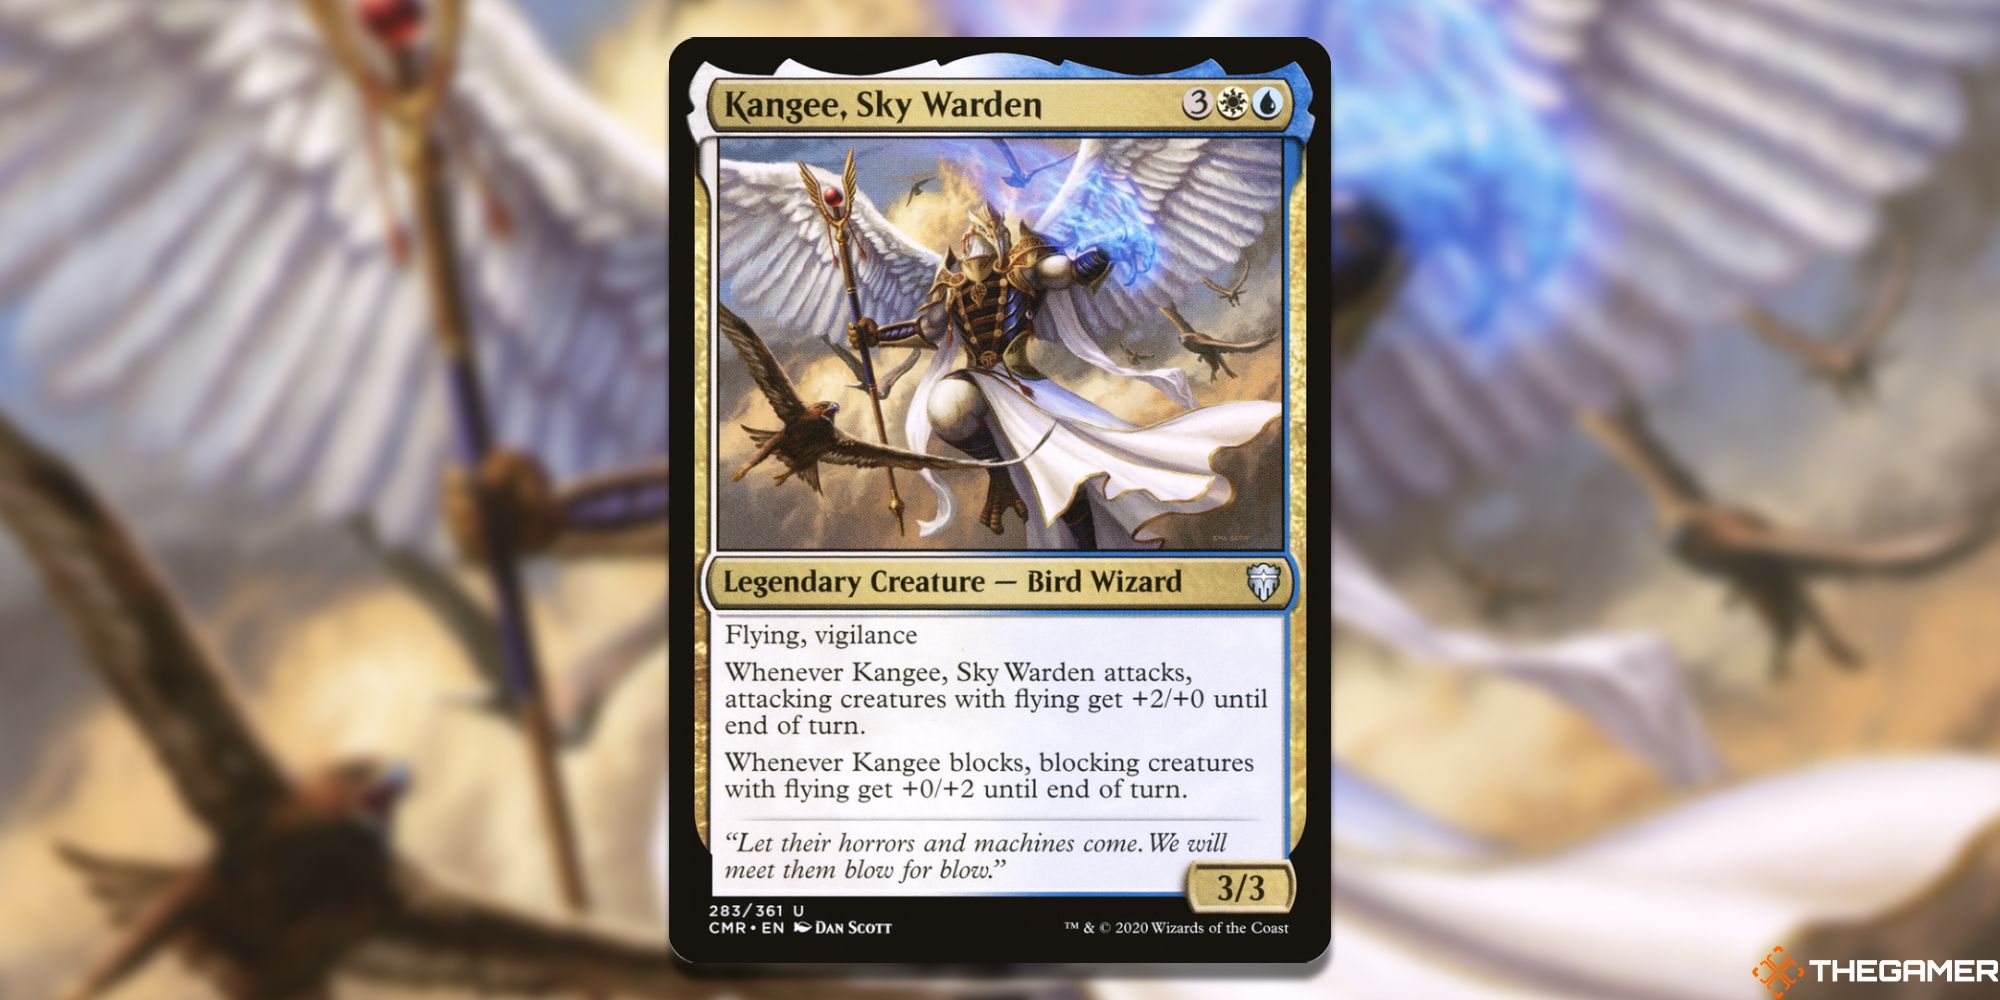 Image of Kangee, the Sky Warden card in Magic: The Gathering, with artwork by Dan Scott